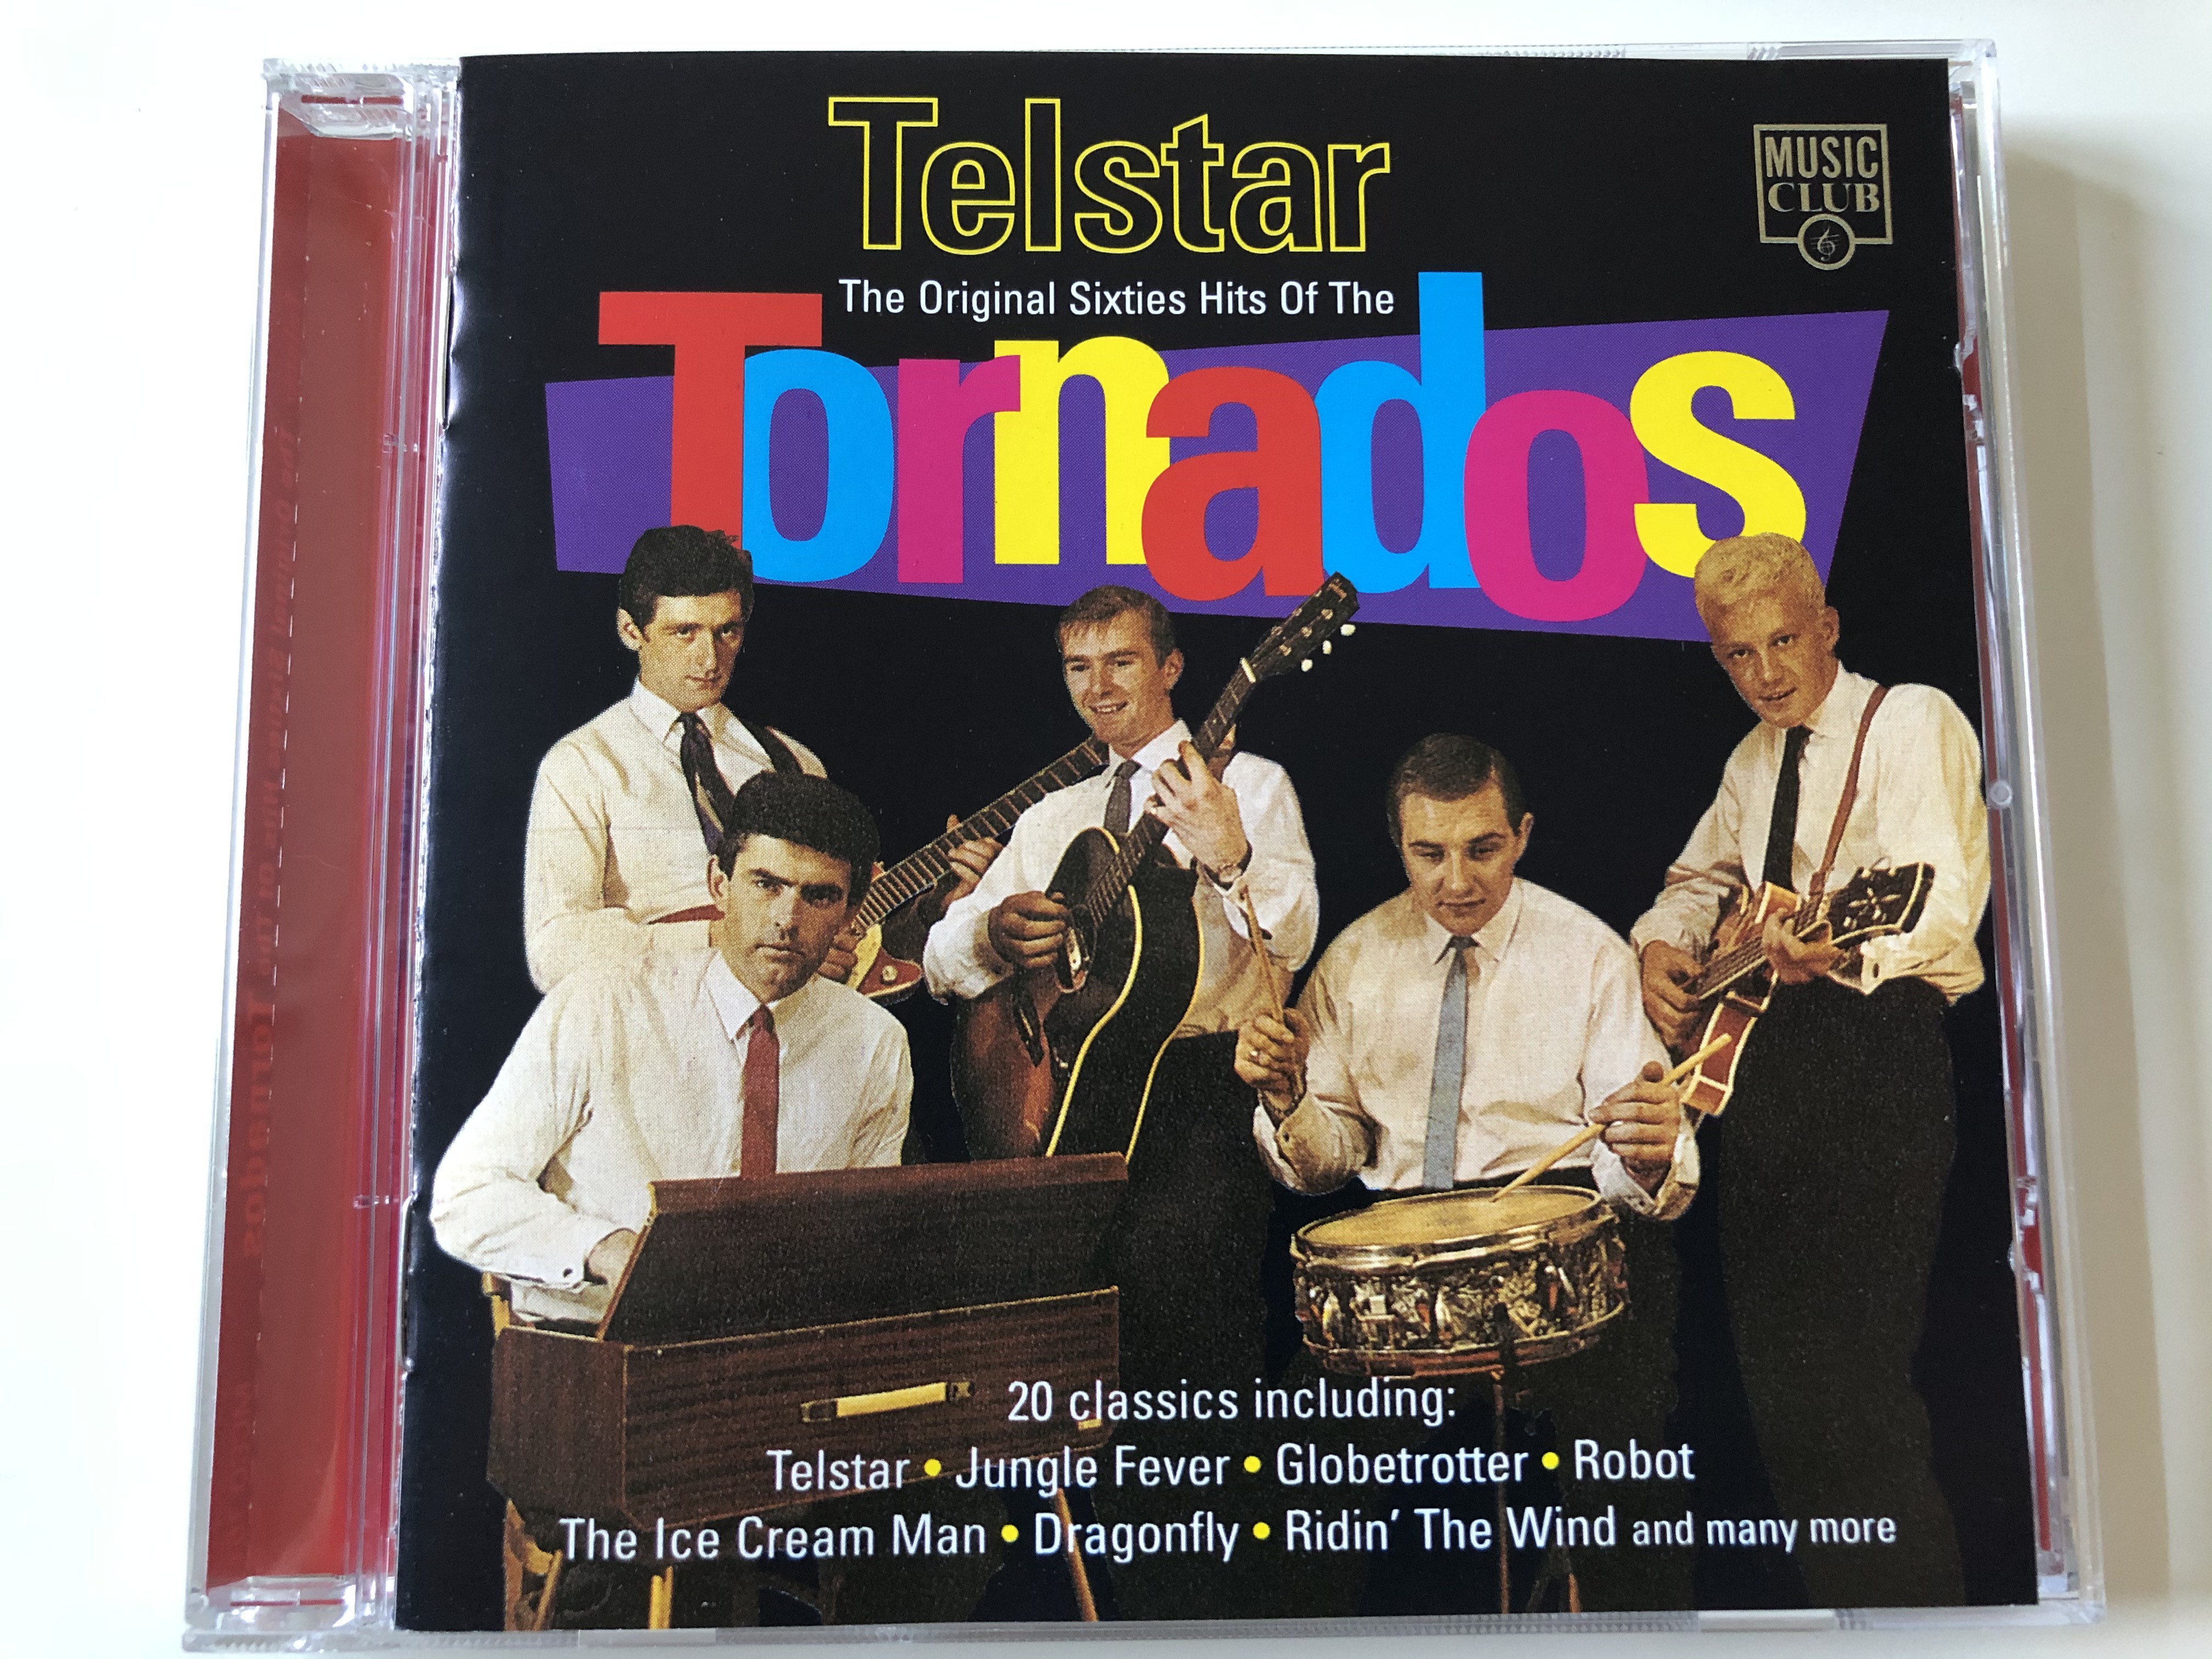 telstar-the-original-sixties-hits-of-the-tornados-20-classics-including-telstar-jungle-fever-globetrotter-robot-the-ice-cream-man-dragonfly-ridin-the-wind-and-many-more-music-club-au-1-.jpg